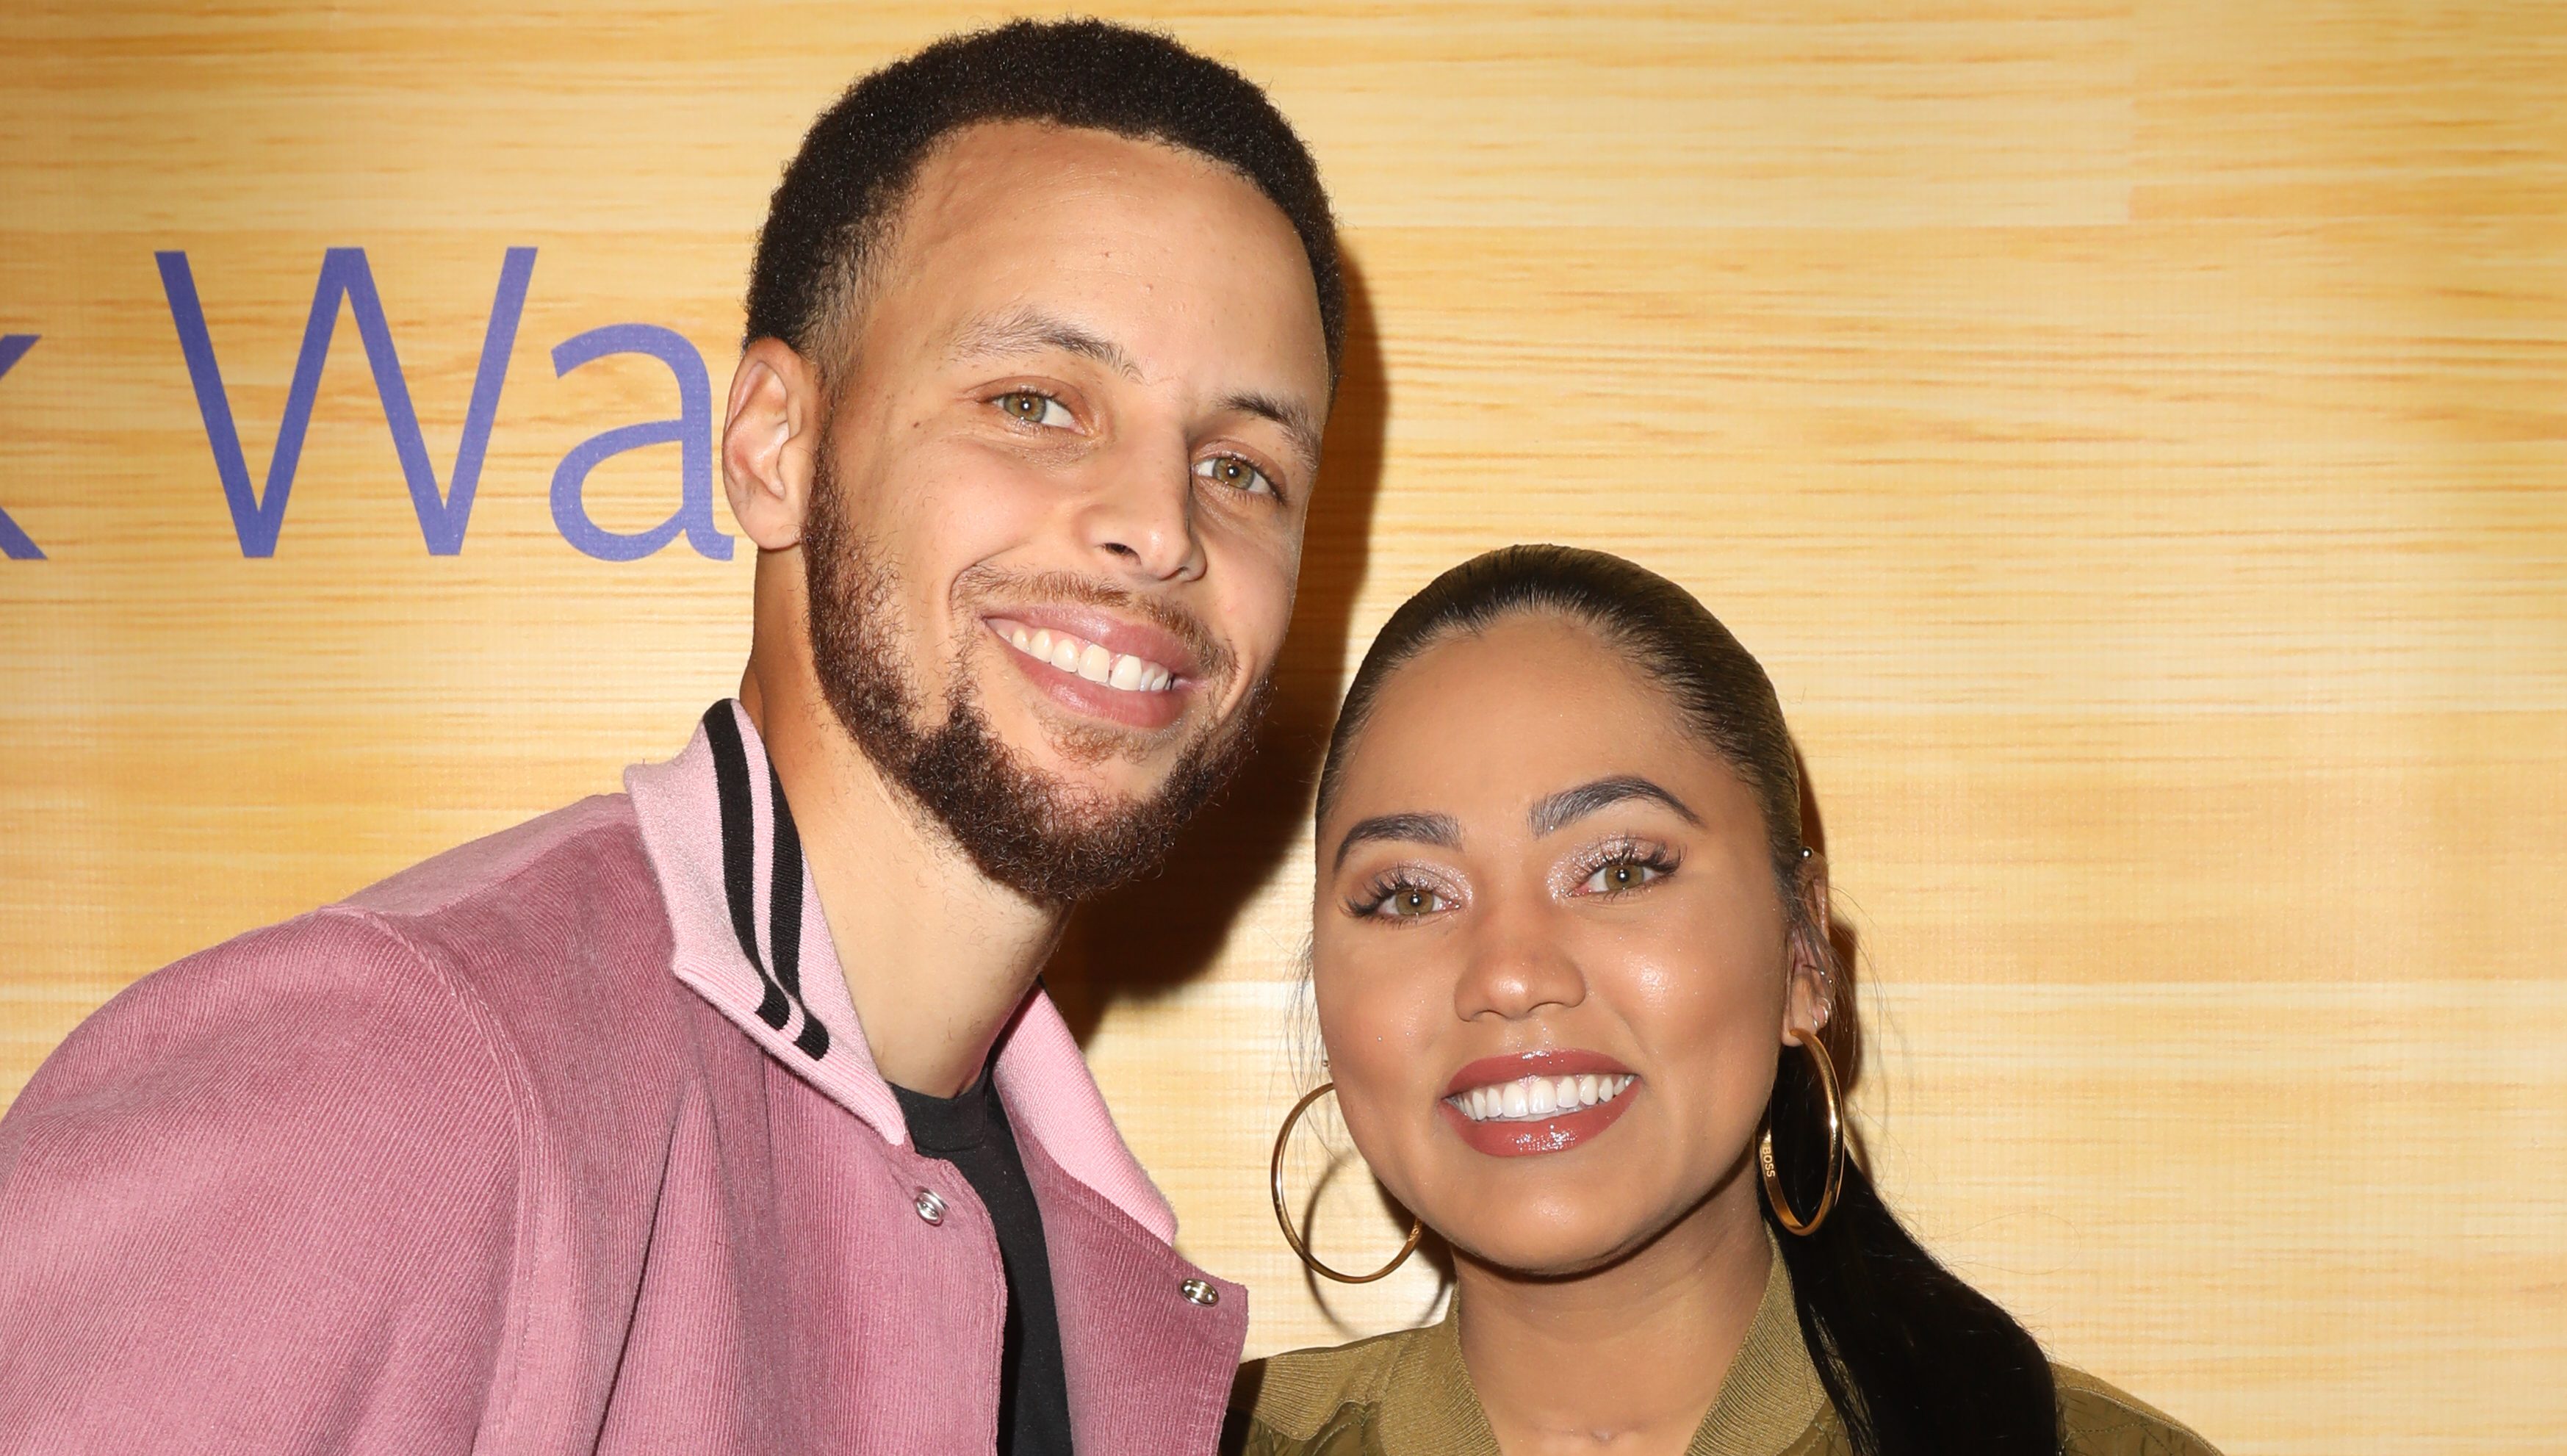 Ayesha Curry, Steph's Wife, Posts 